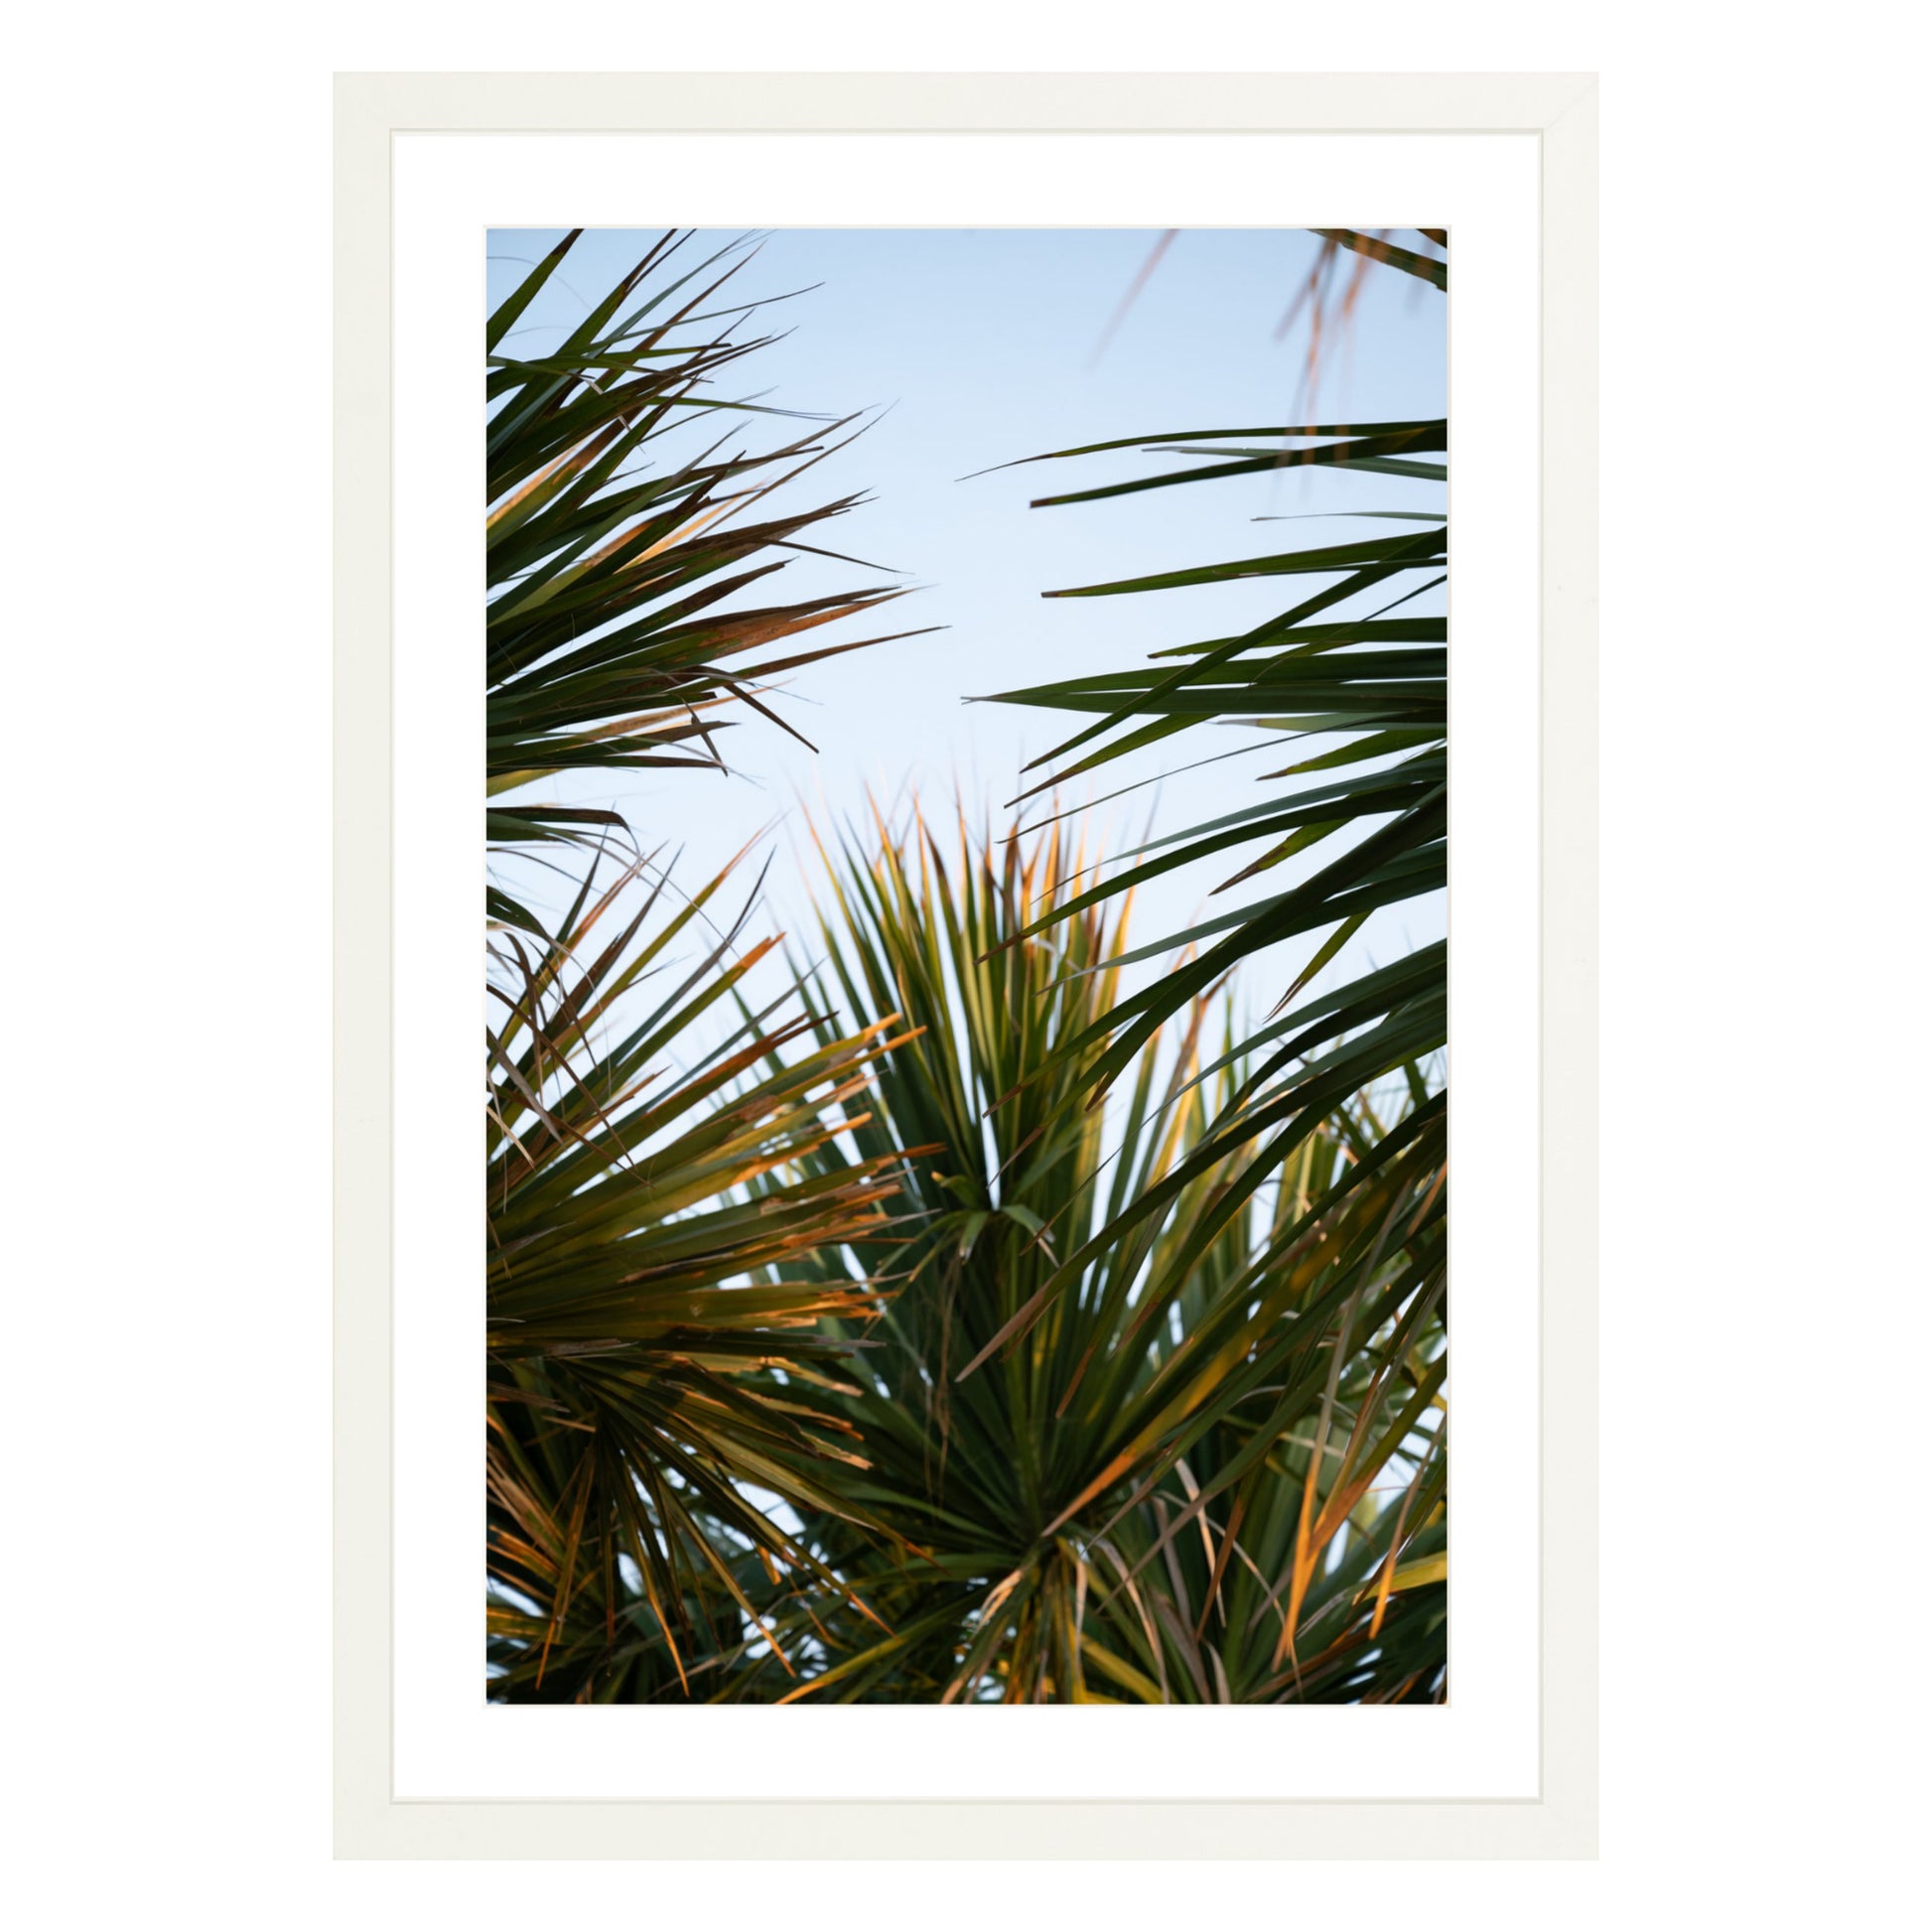 Photograph of beach palms in front of blue sky framed in white with white mat